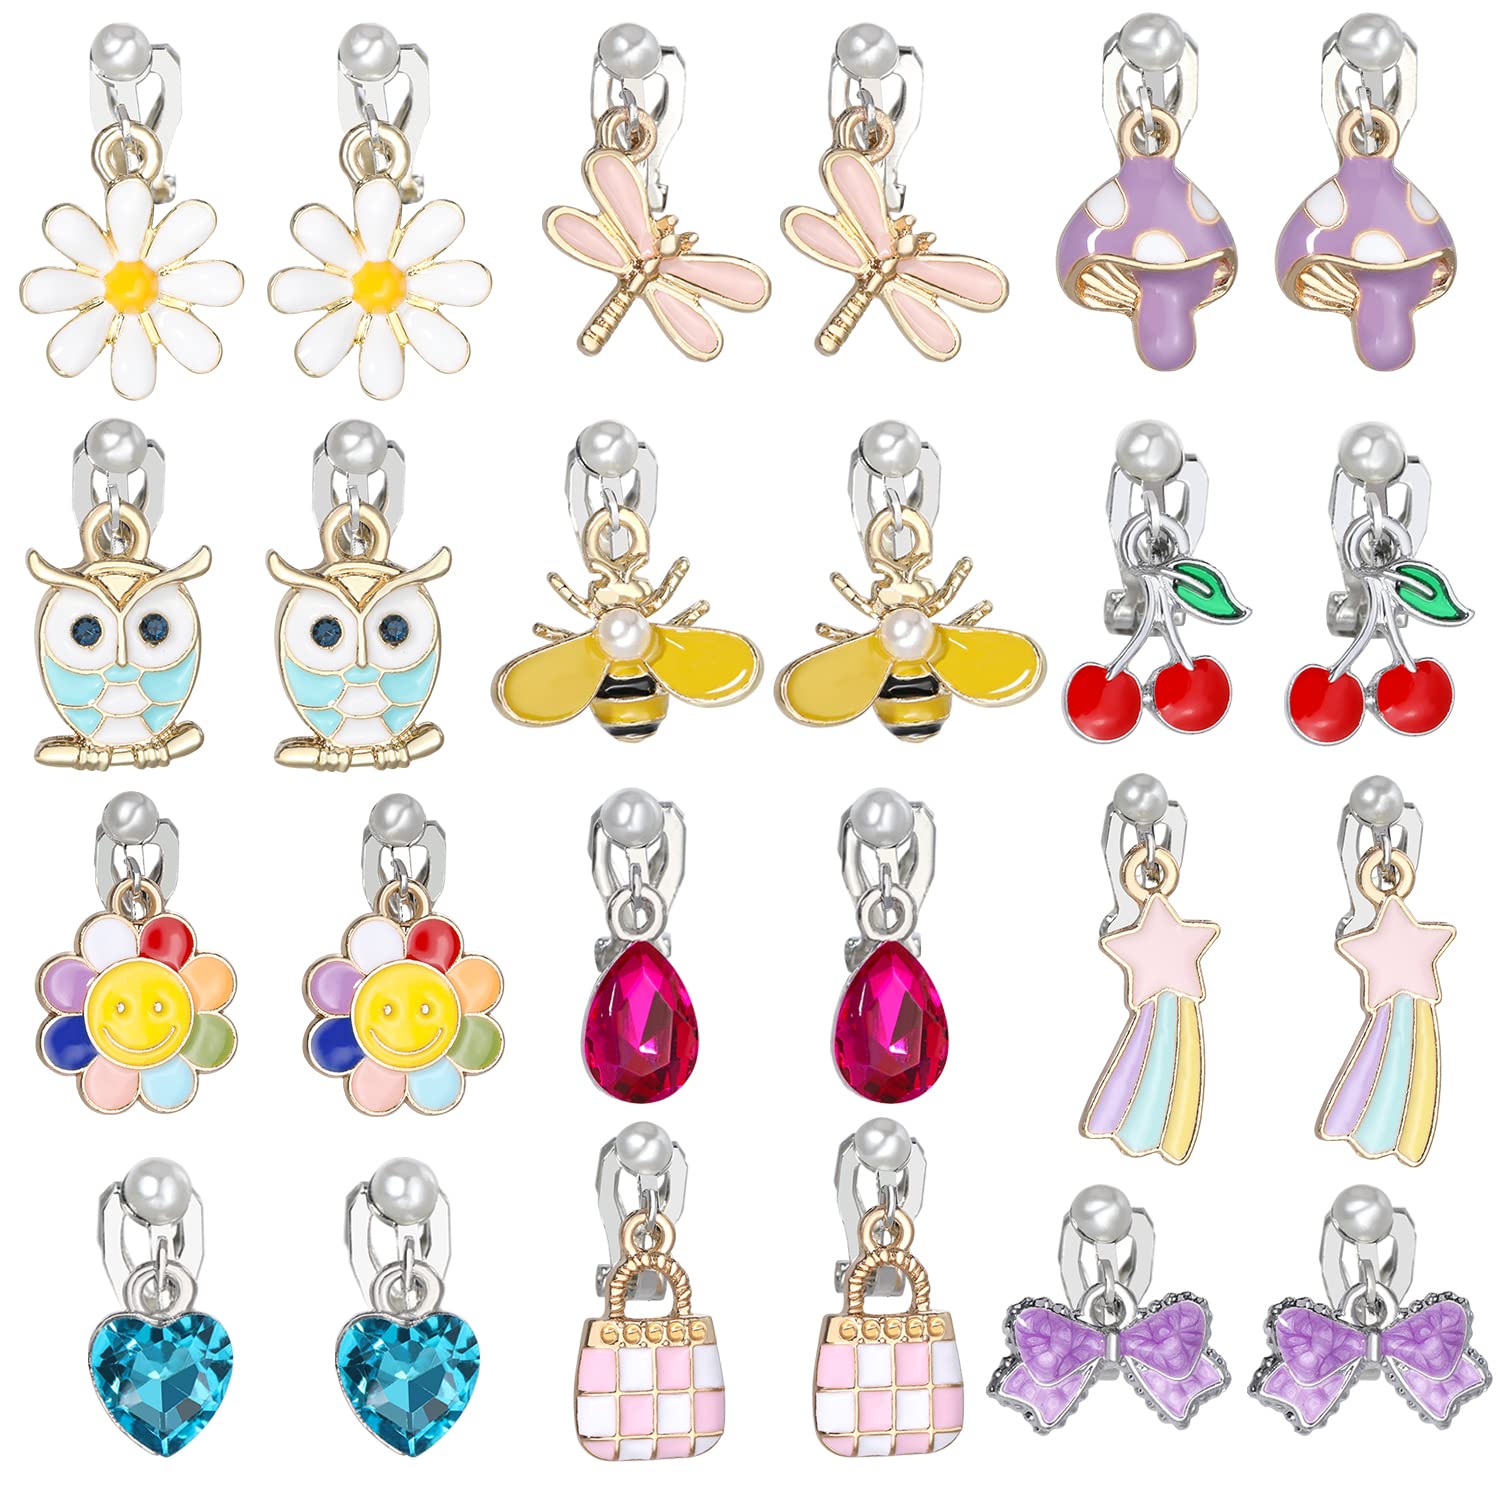 PinkSheep Clip On Earrings for Little Girls Kids Jewelry 12 Pairs Gift for 4/5/6/7/9/10 Years Old Unicorn Cat Flower Earring (classic)